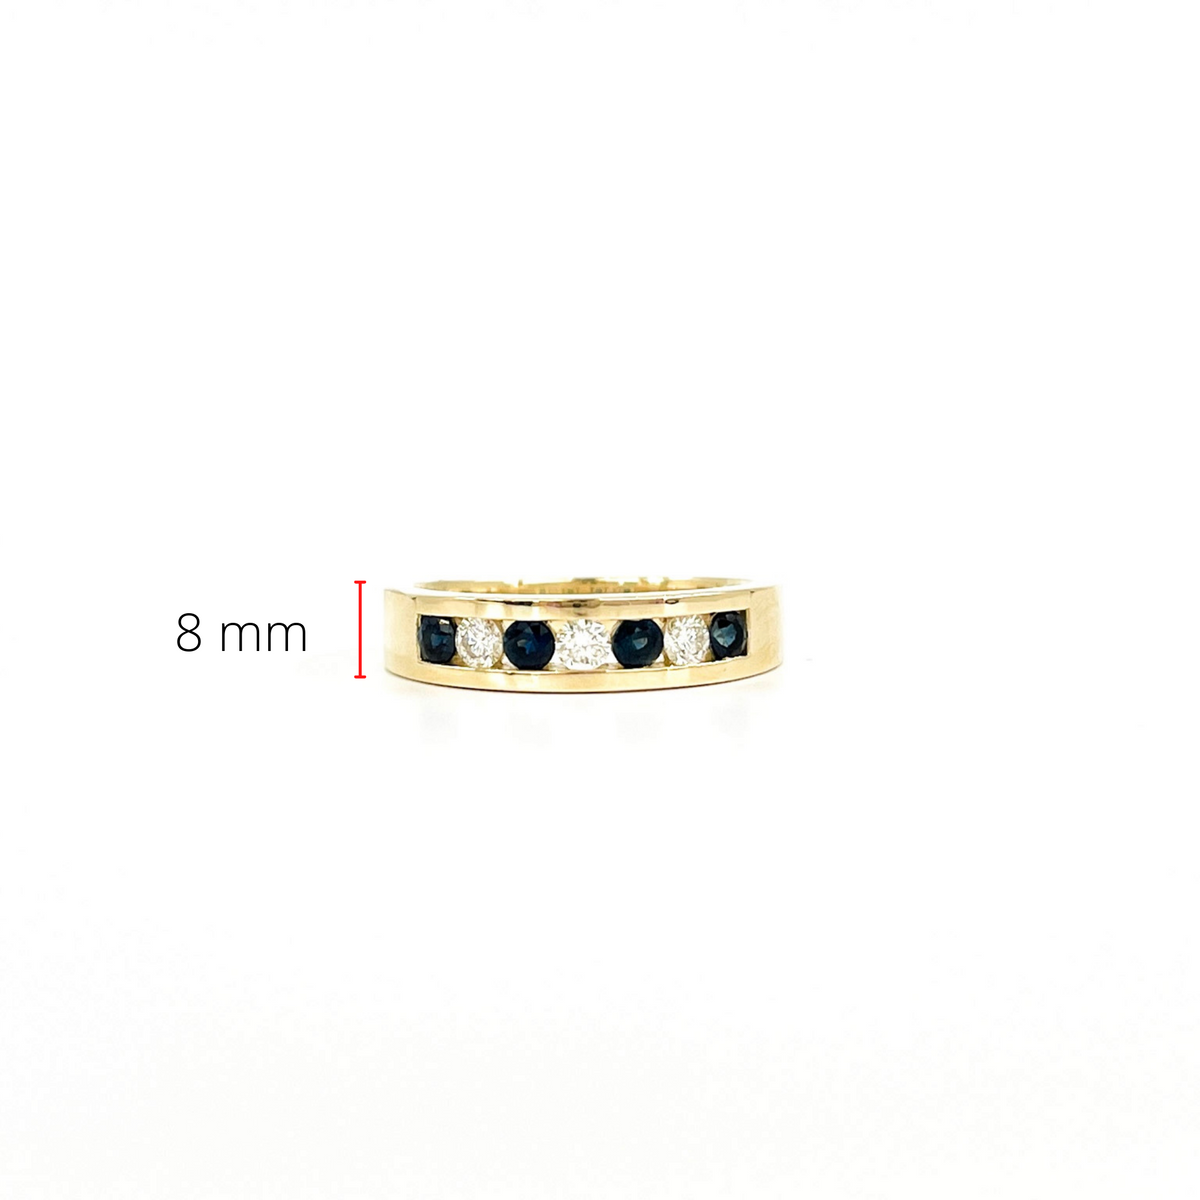 10K Yellow Gold 0.28cttw Genuine Sapphires &amp; 0.18cttw Diamond Channel Set Ring / Band, size 6.5